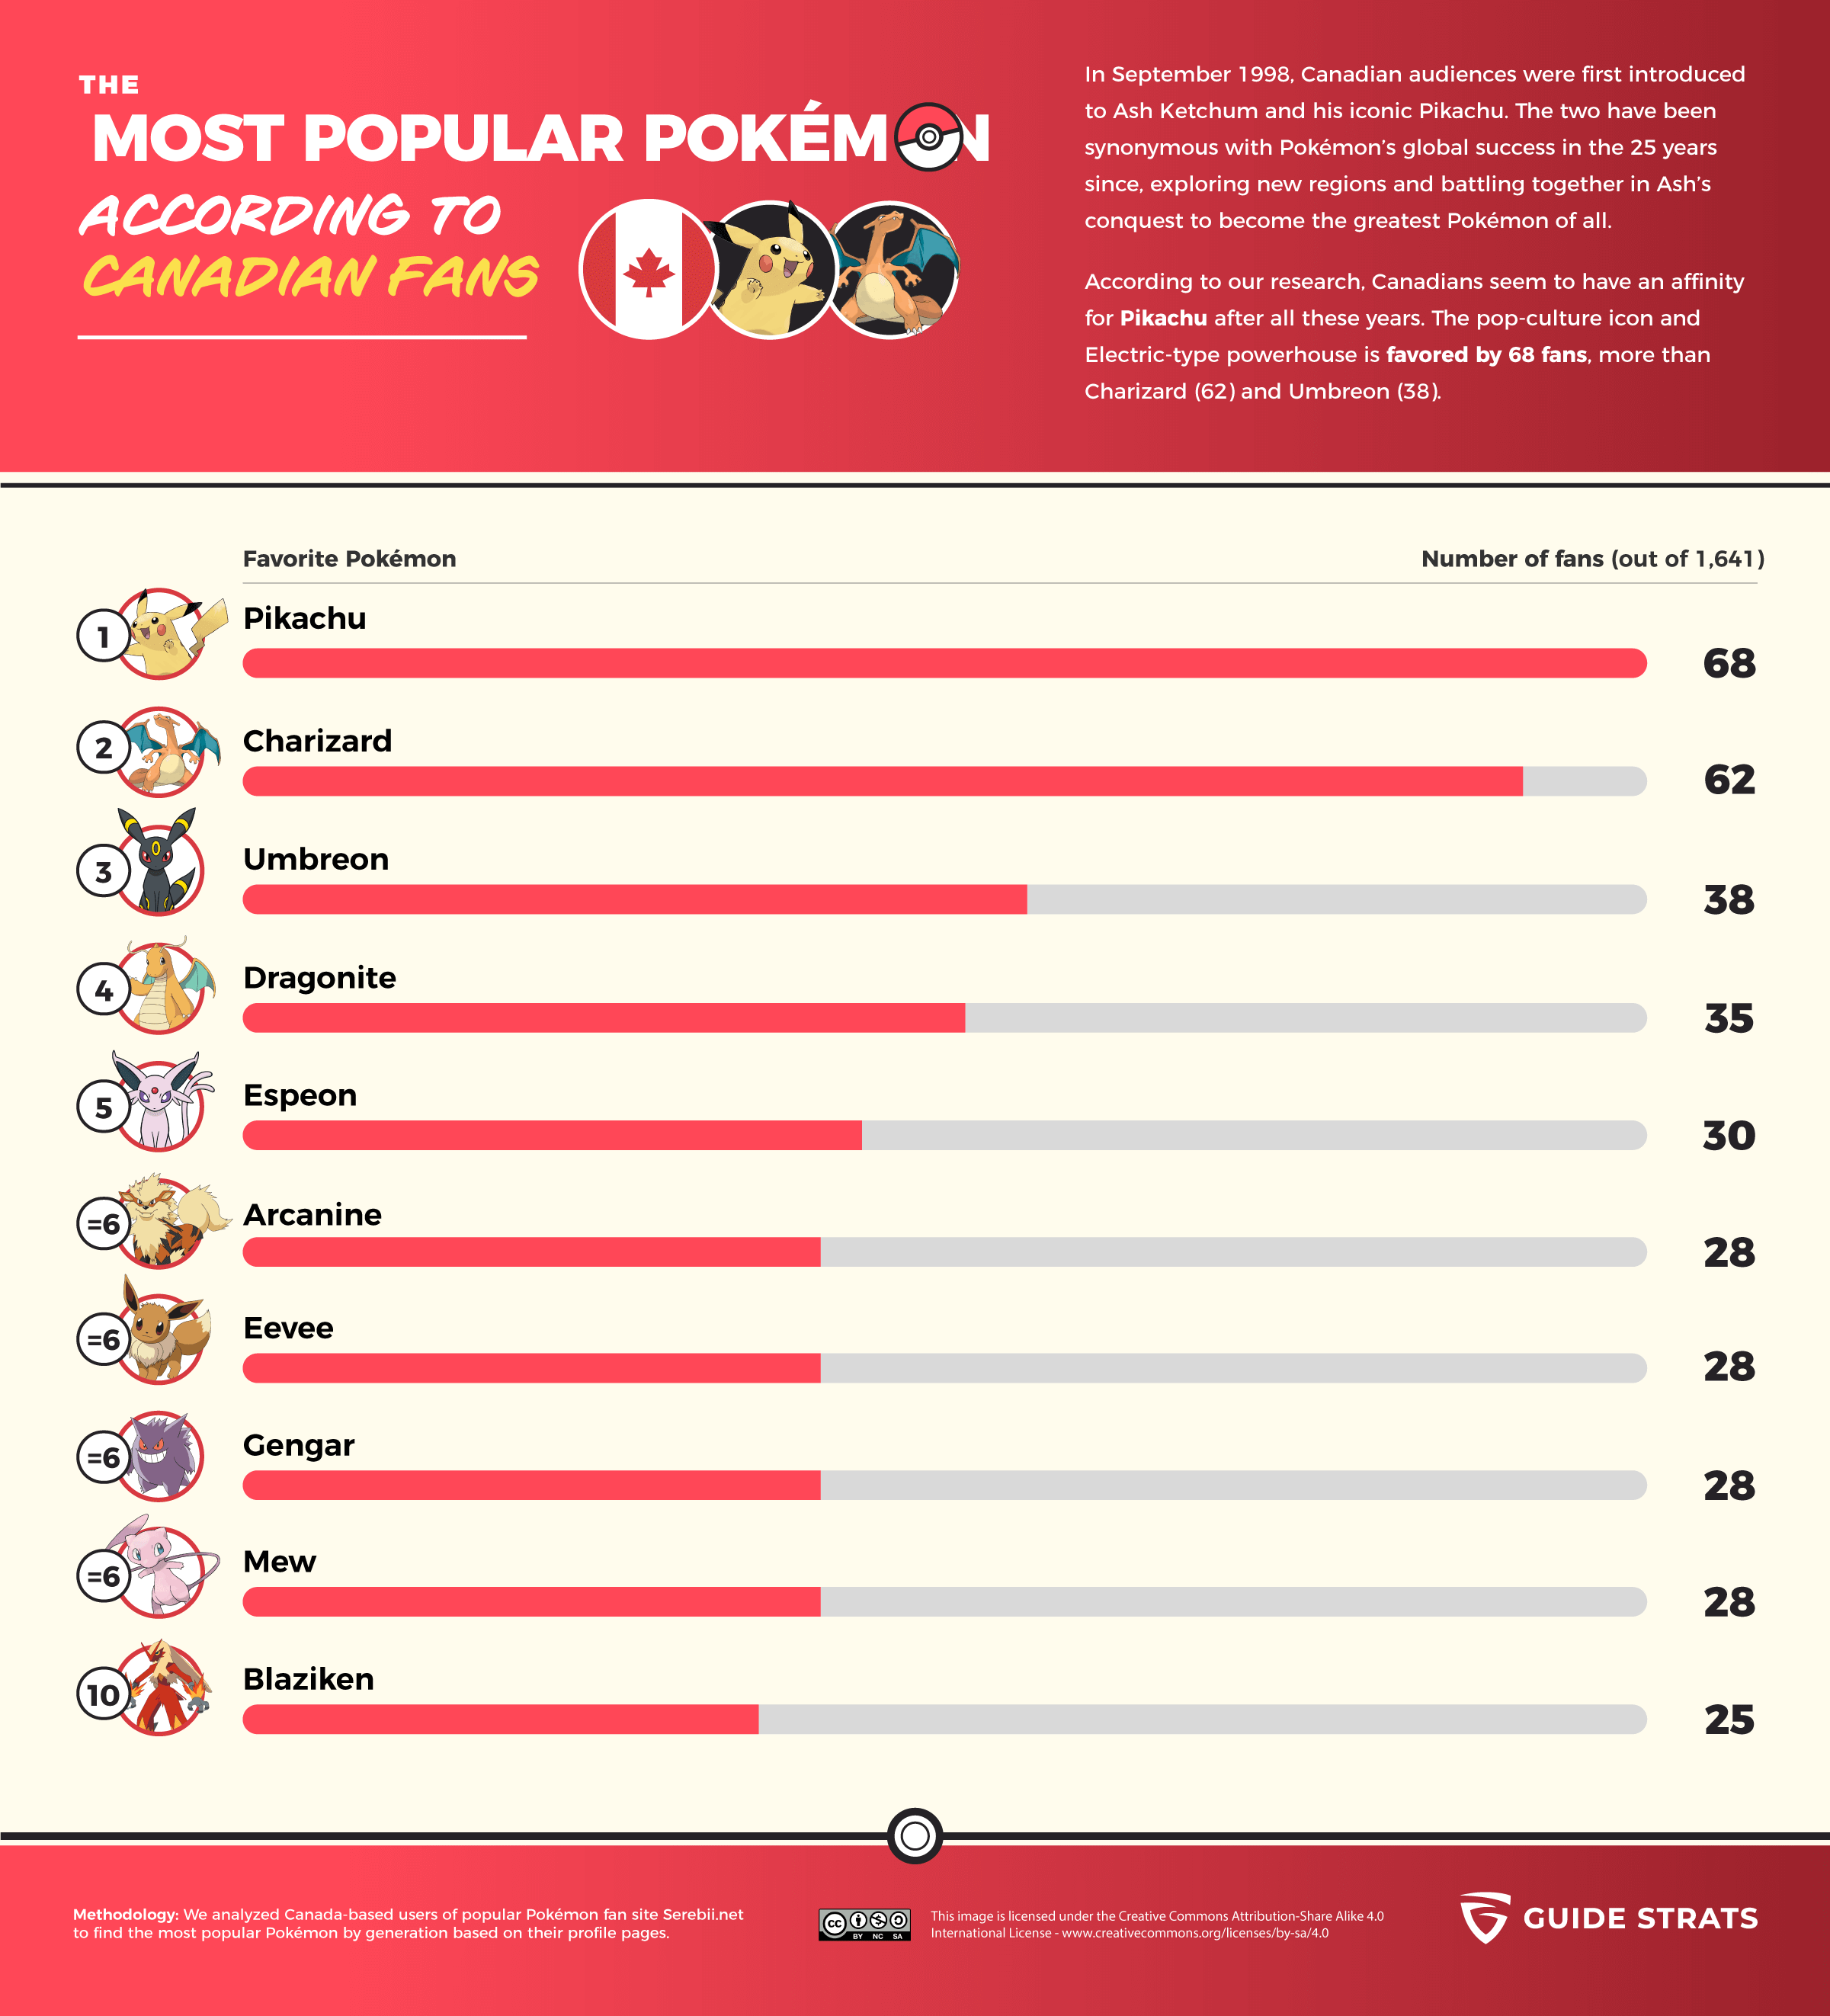 The most popular Pokemon, according to Canadian fans